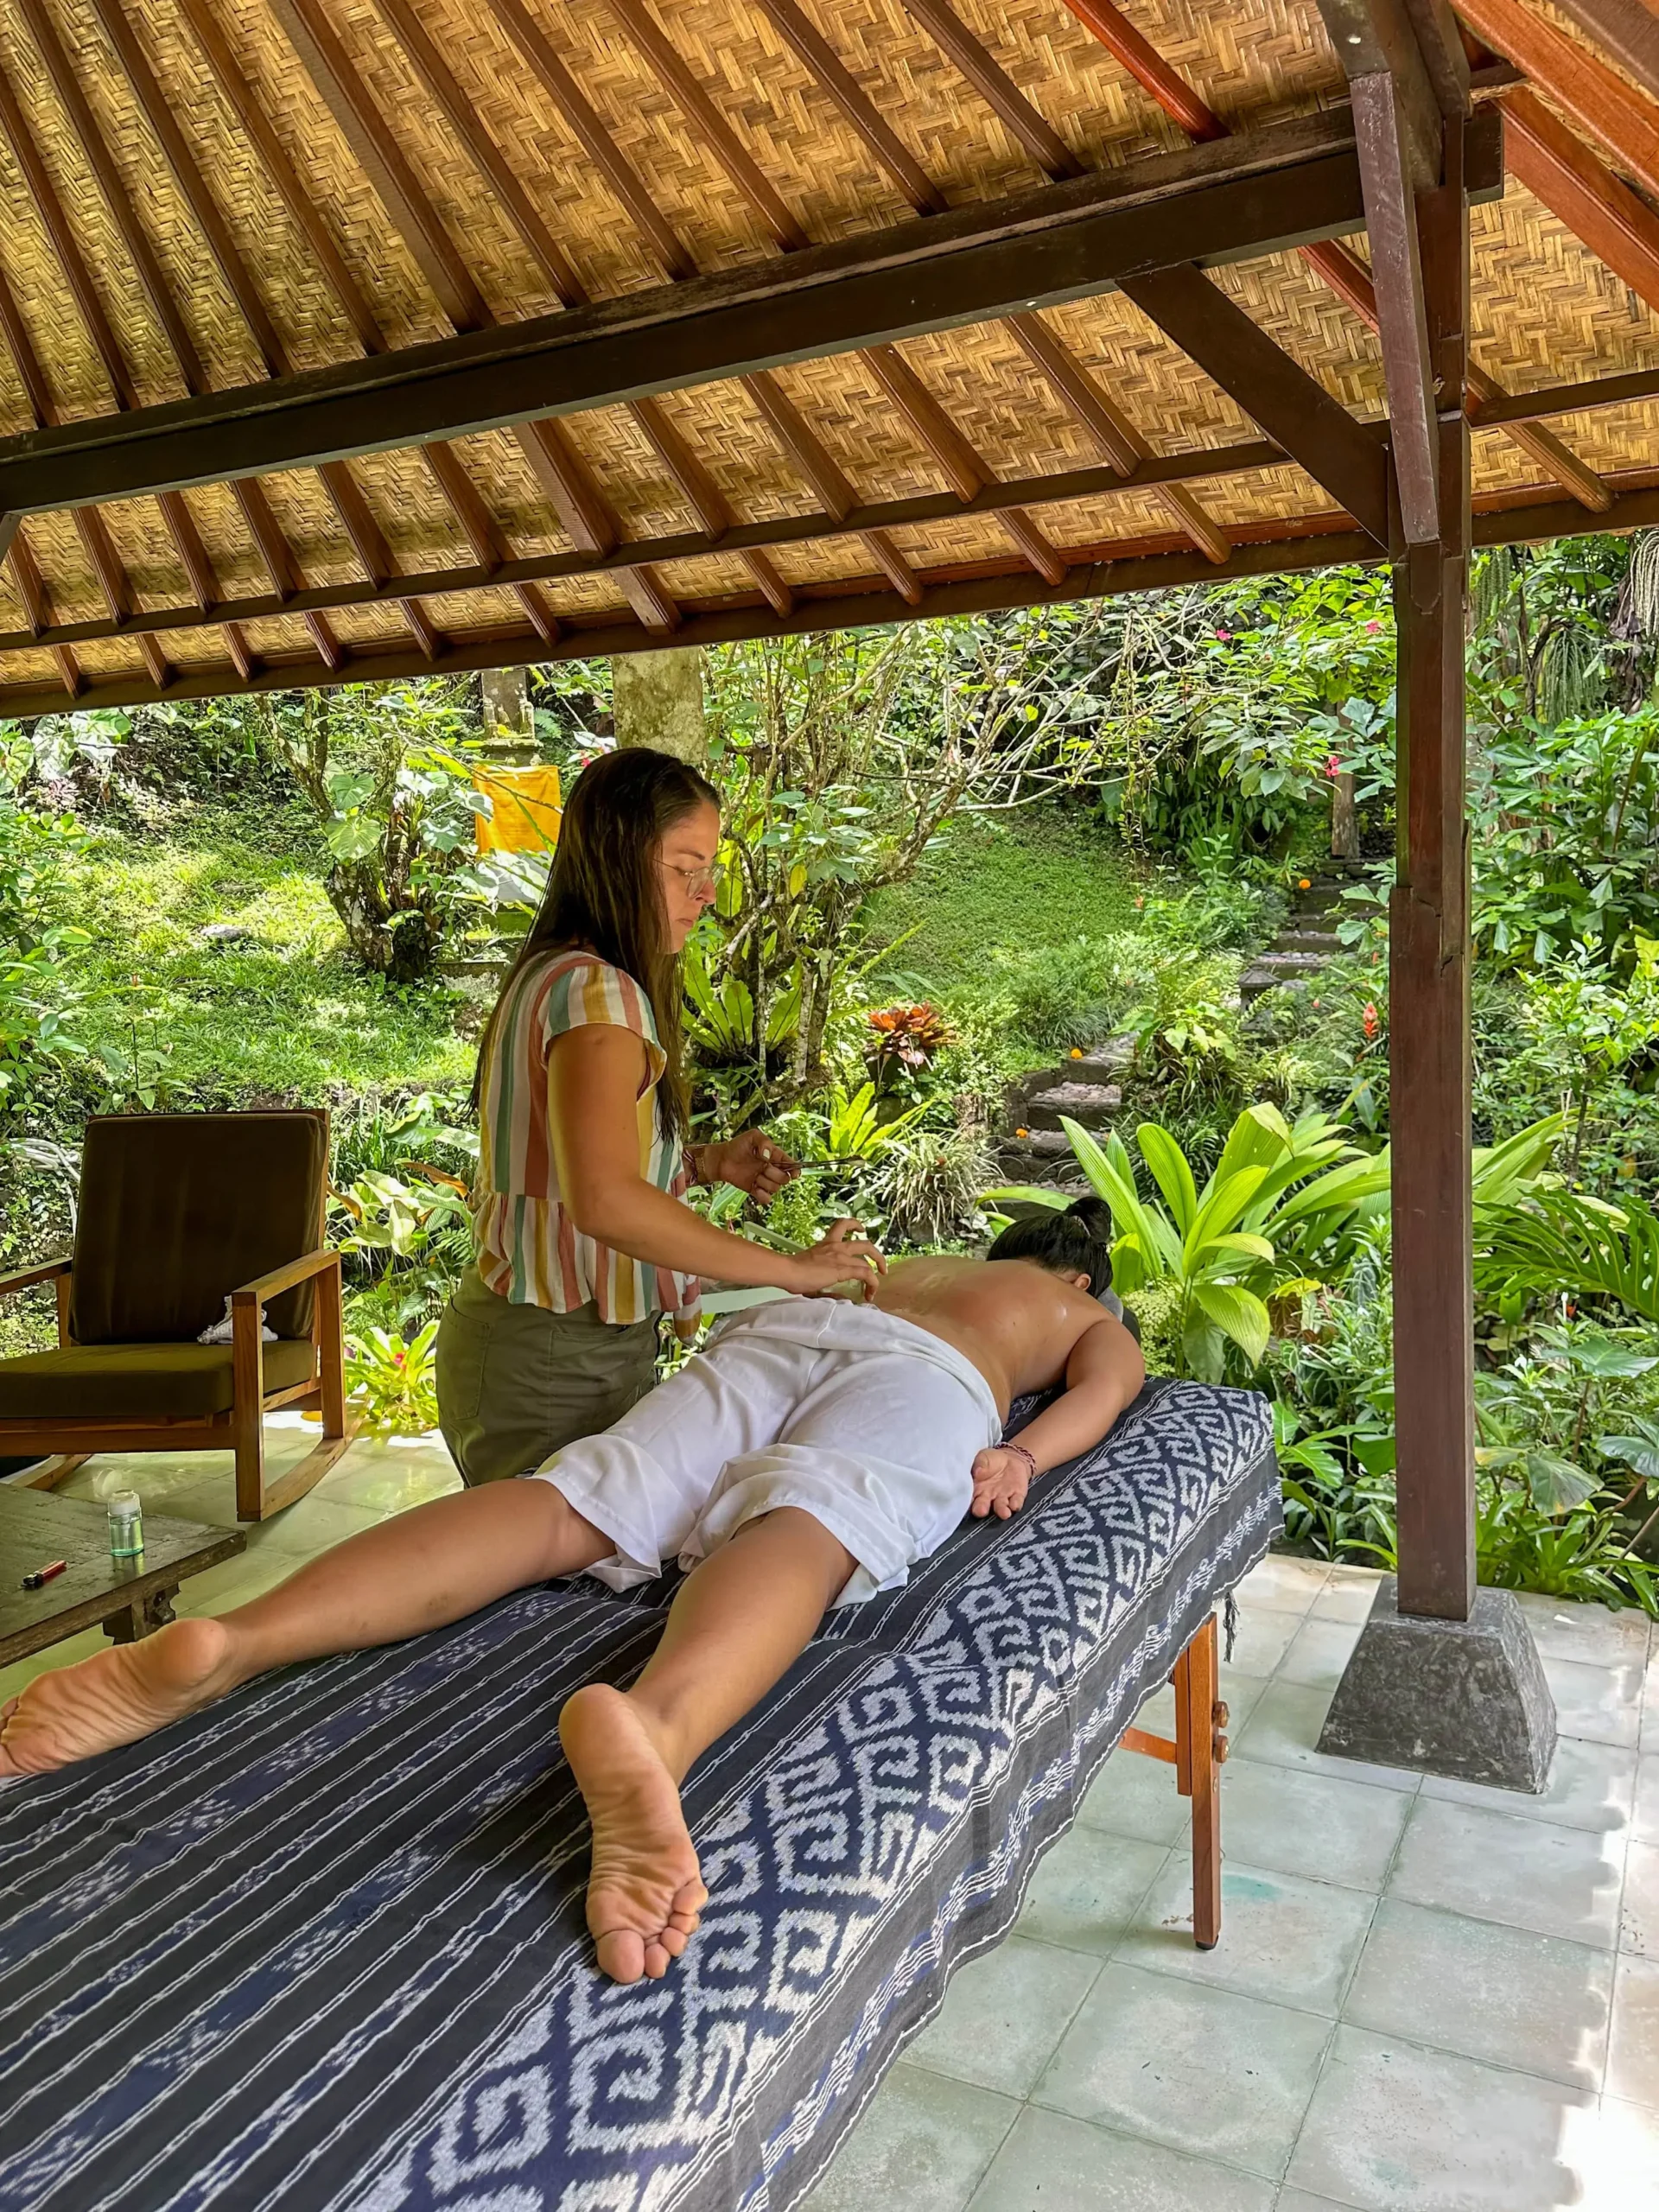  Dr. Sofia of Balancing Qi performed the cupping therapy on me lying face down on a massage table at a healing retreat in Bali.